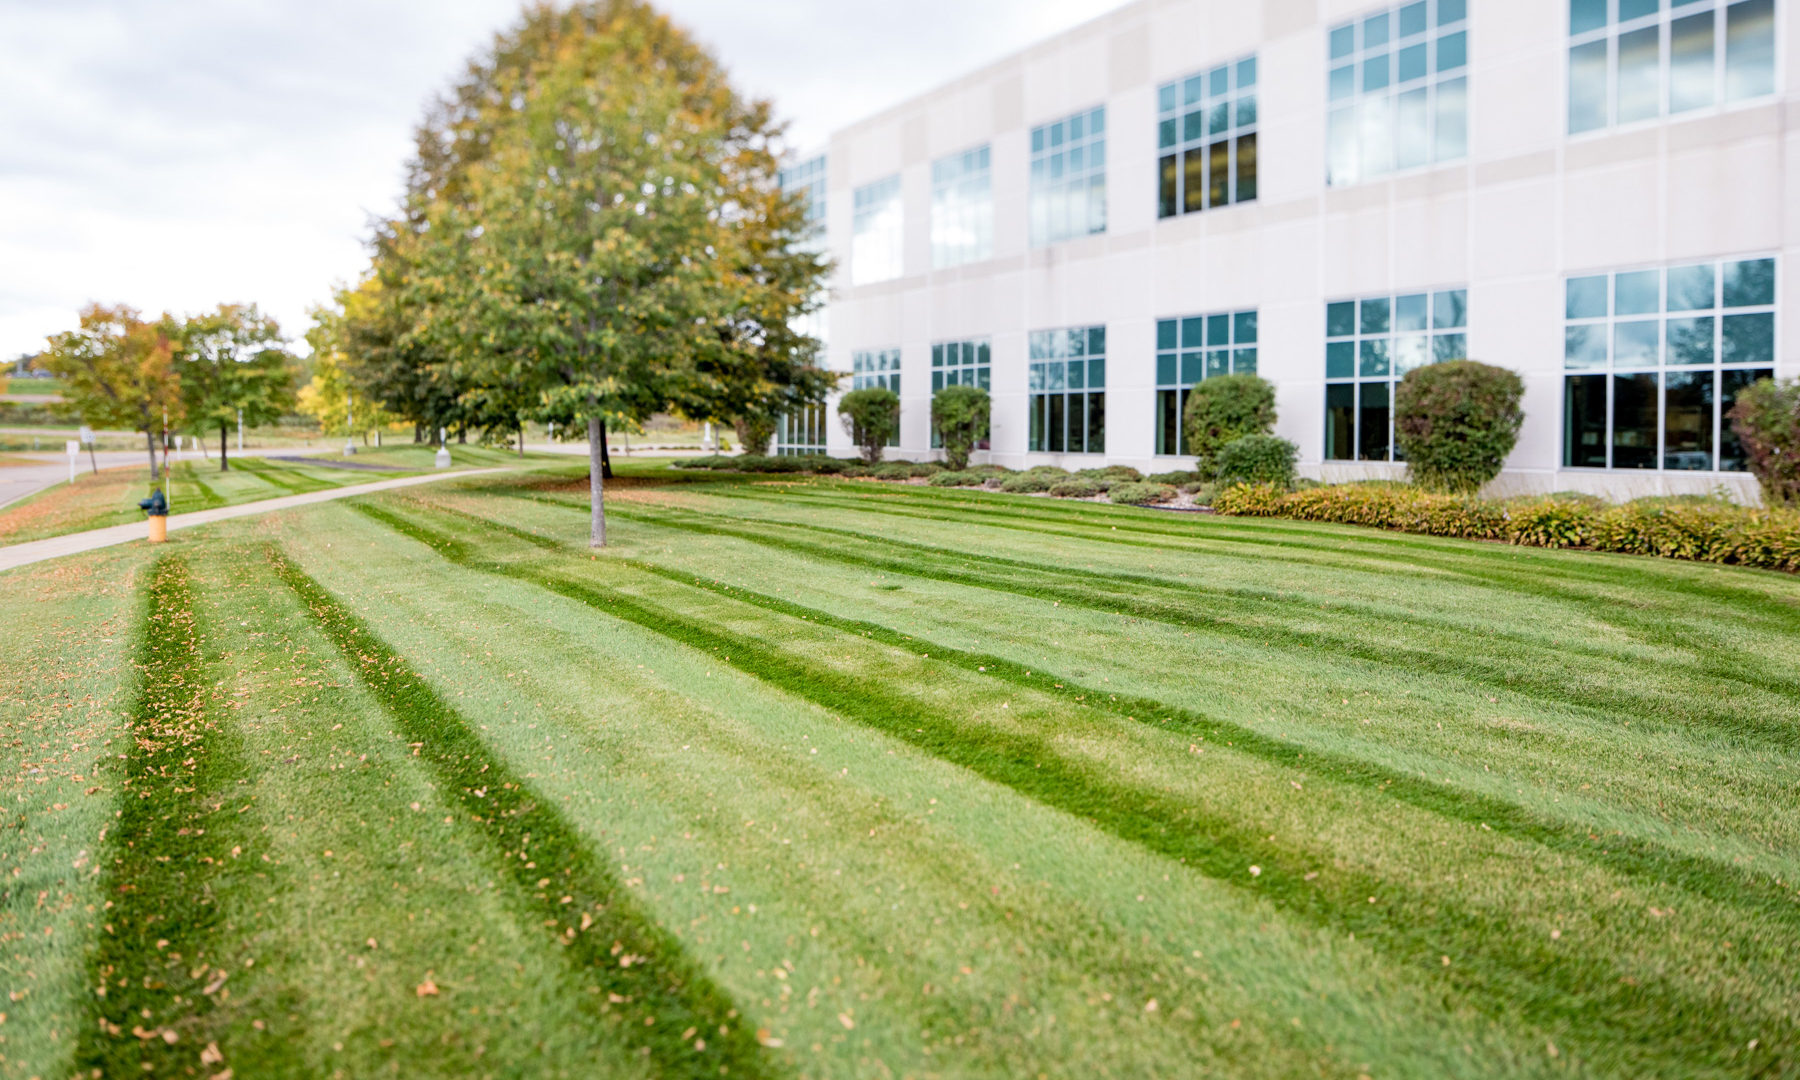 Commercial Property grounds management by Meadowgreen Landscape